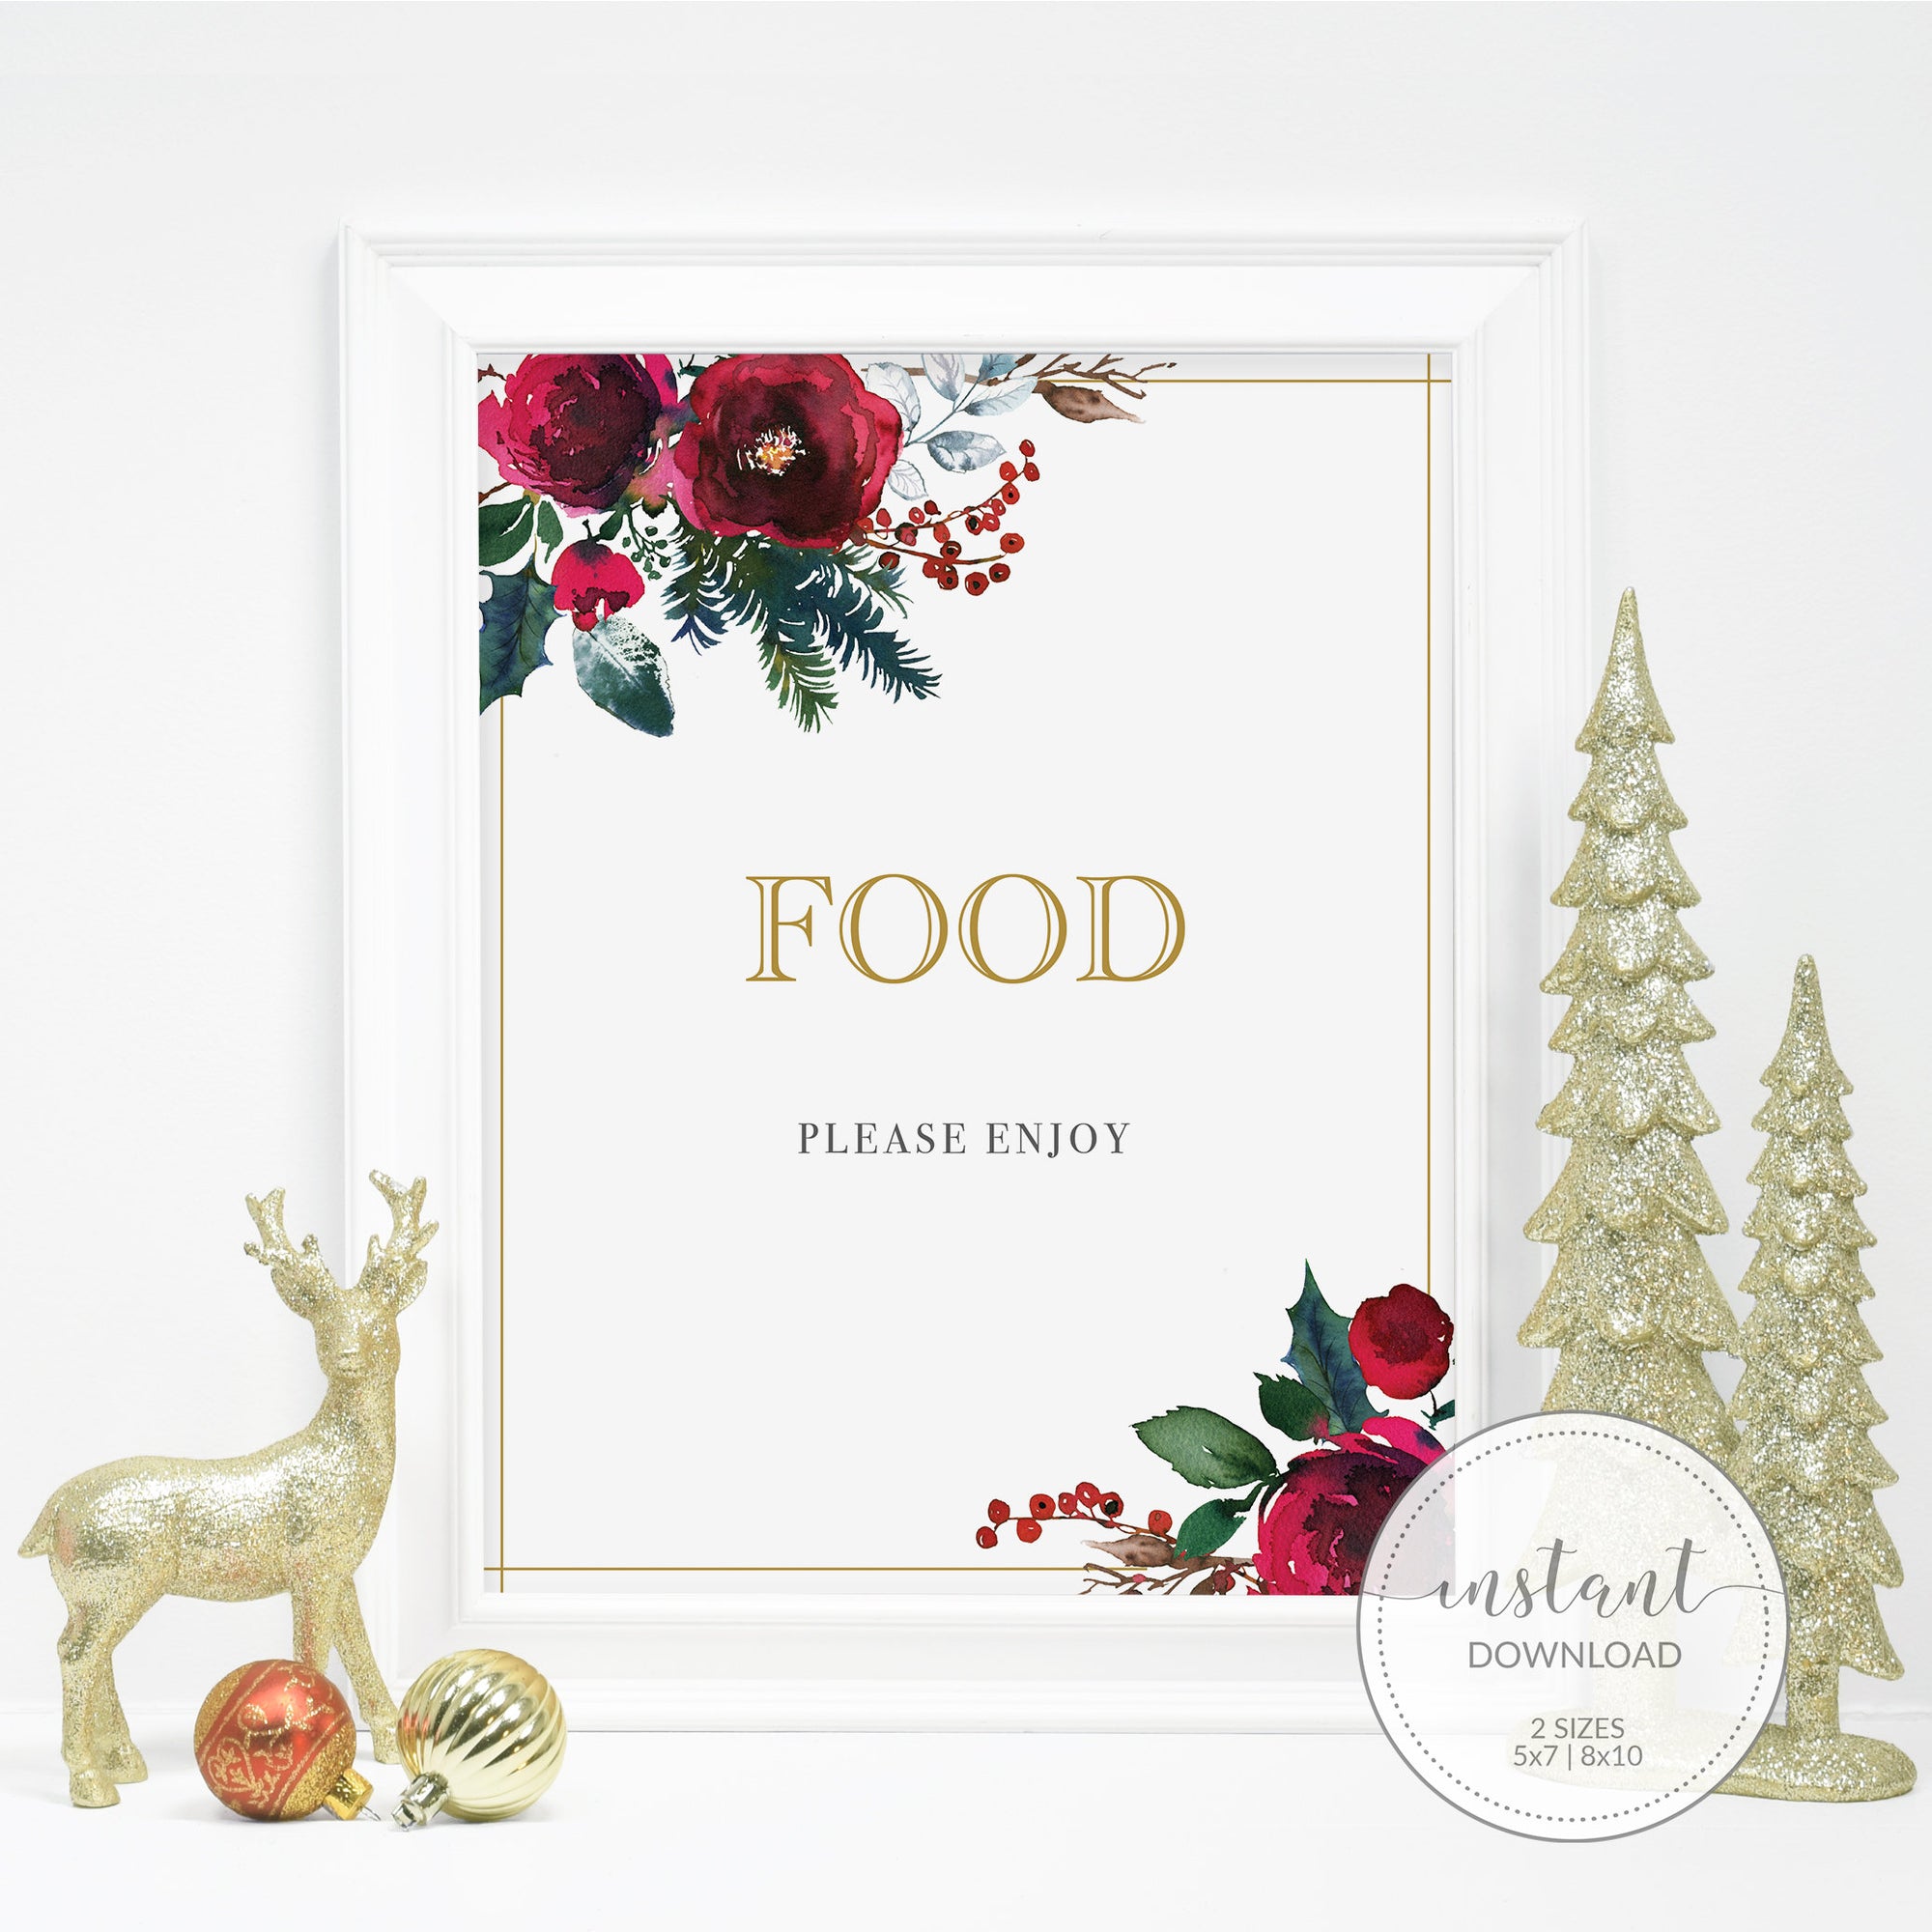 Christmas Party Food Sign Printable, Christmas Bridal Shower Sign, Holiday Party Printable Decorations, INSTANT DOWNLOAD - CG100 - @PlumPolkaDot 